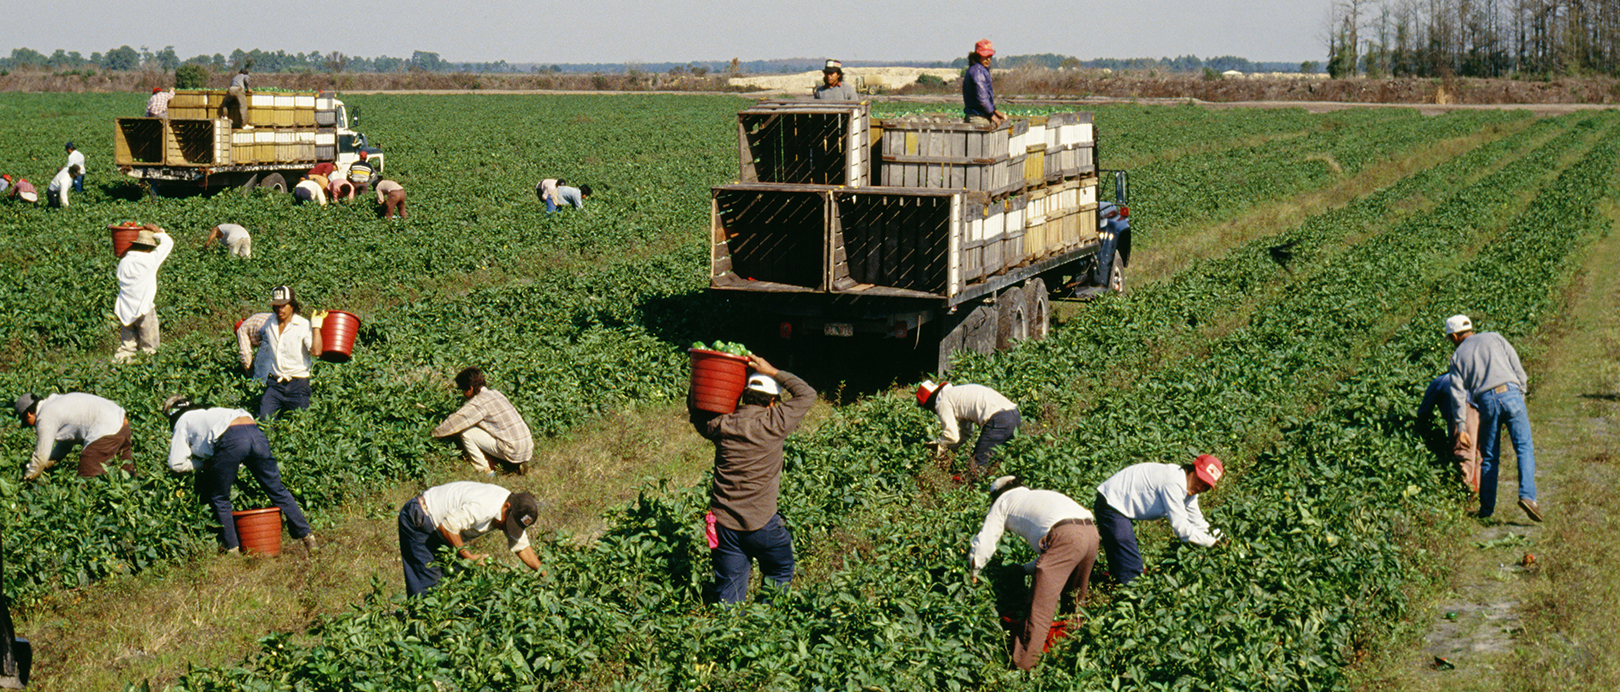 A group of people in a field harvesting produce with trucks